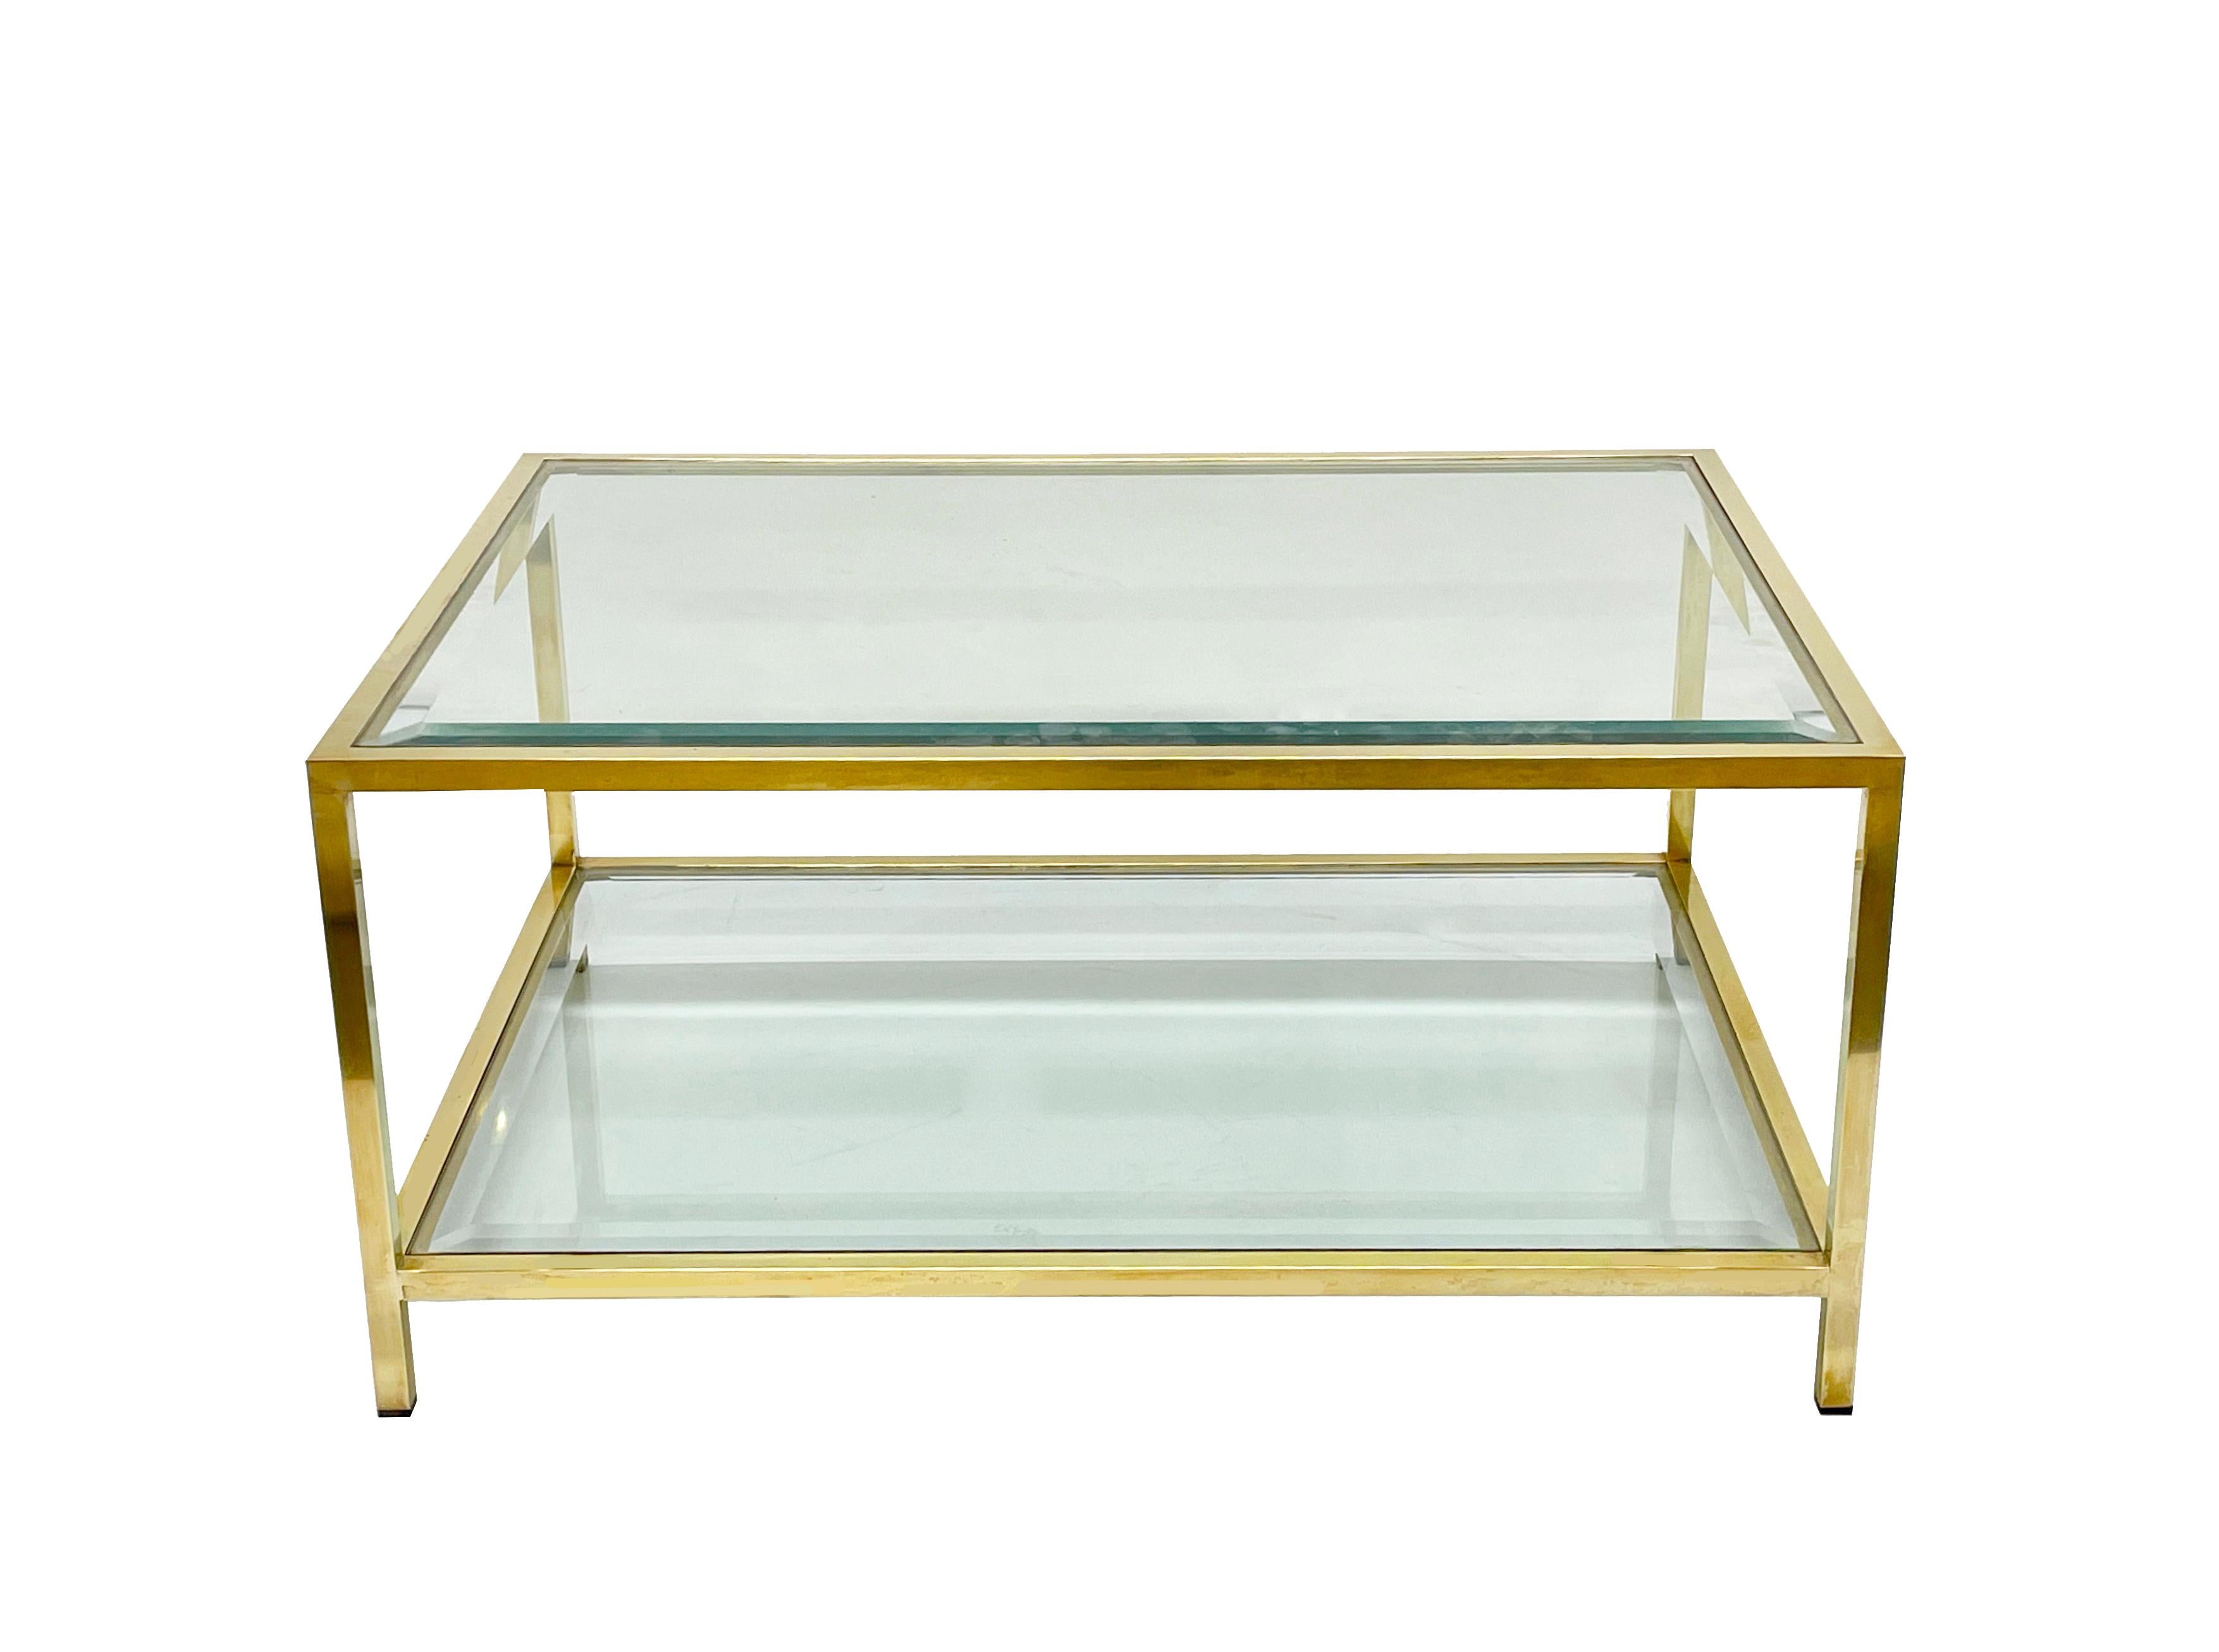 MidCentury Brass and Glass Italian Double-Tiered Rectangular Coffee Table, 1970s For Sale 4